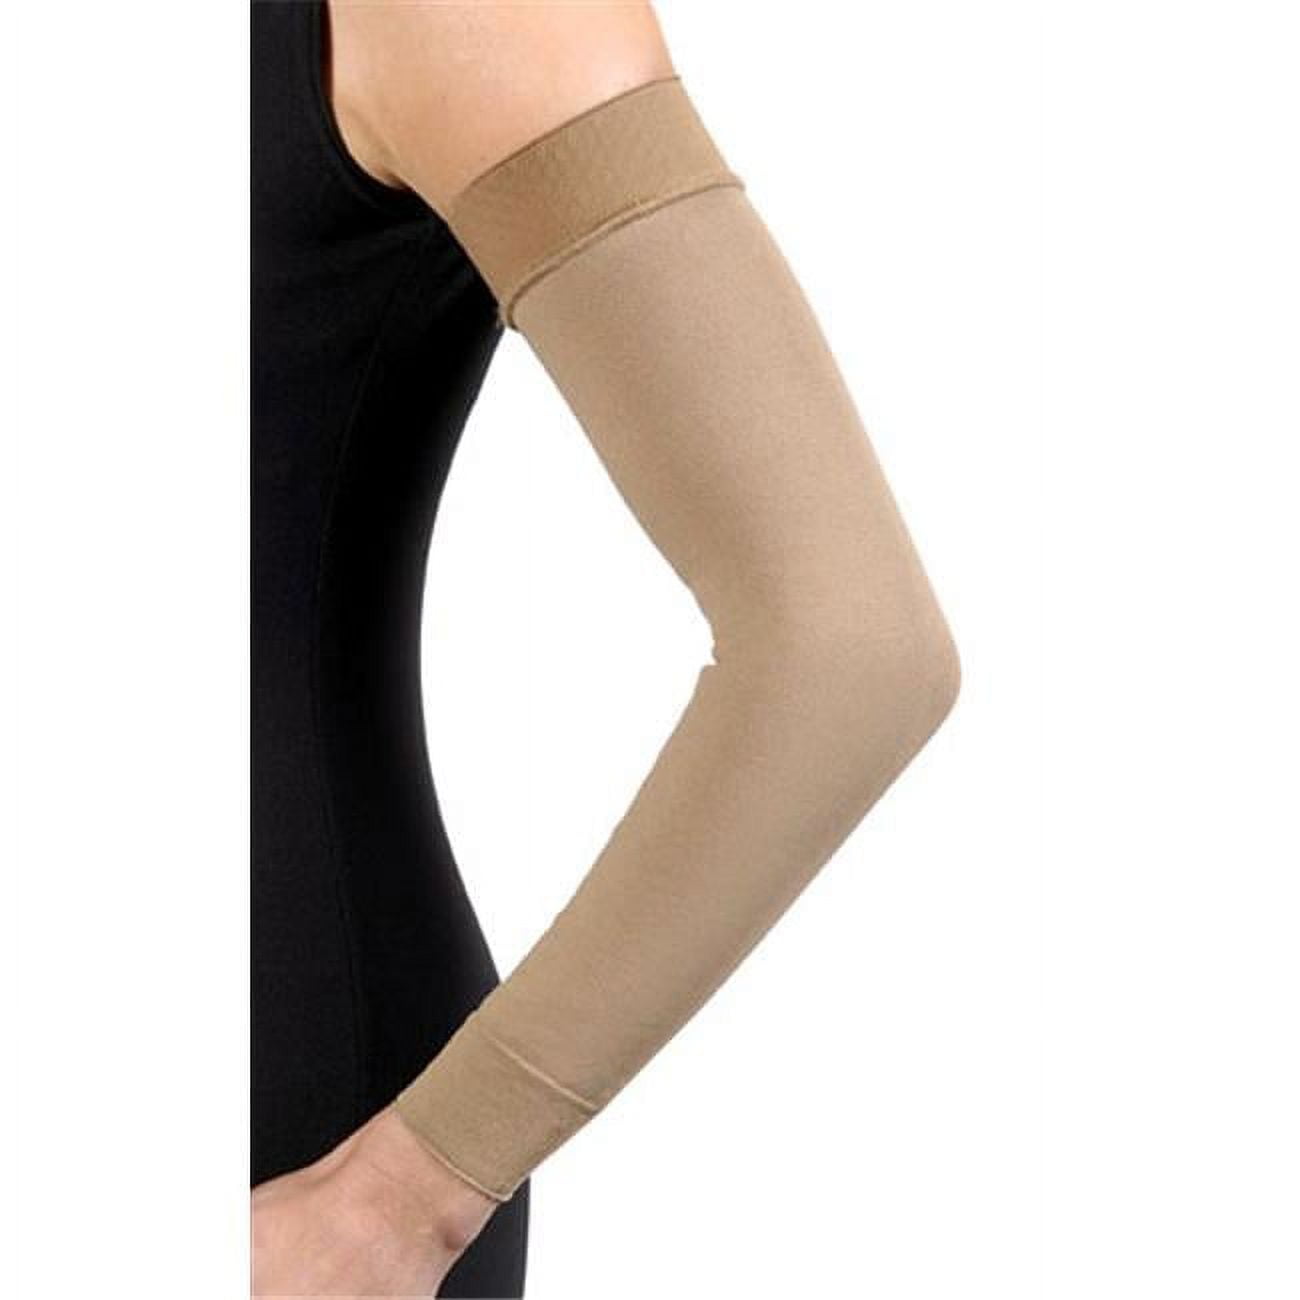 Jobst Bella Strong Lymphedema Armsleeve - 20-30mmHg Natural 10